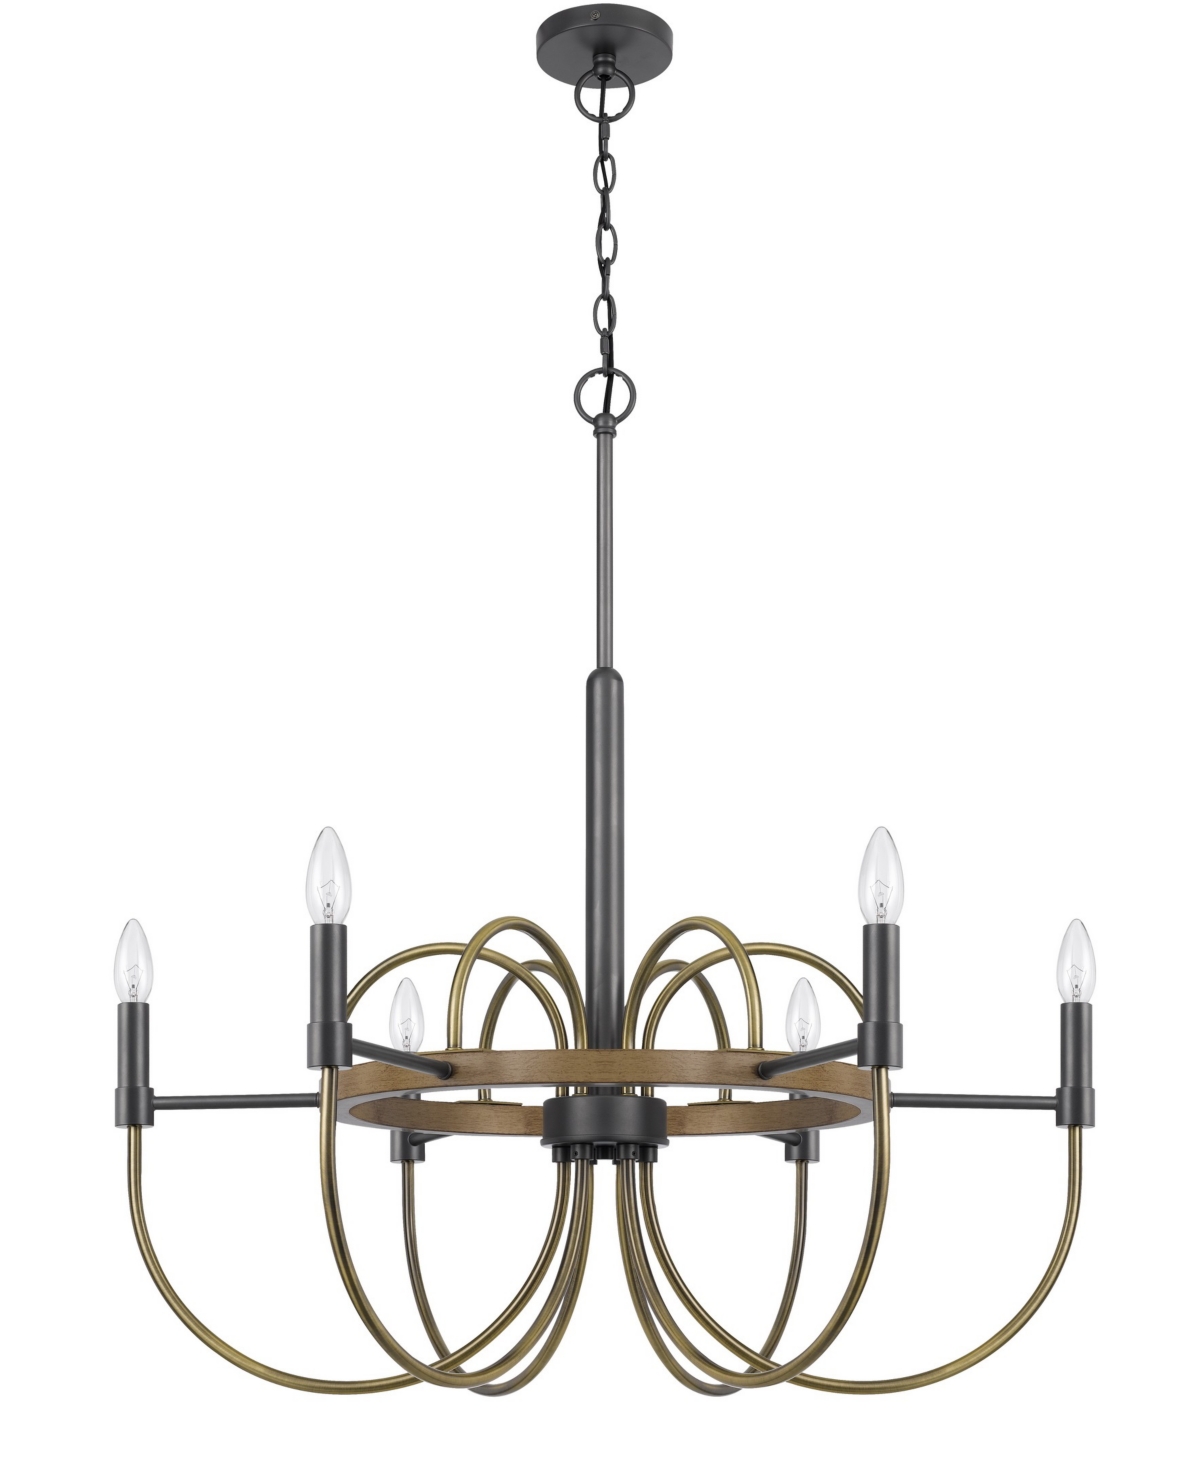 Cal Lighting Seagrove 6 Light 31" Height Metal Chandelier In Antique Brass,charcoal Gray,wood